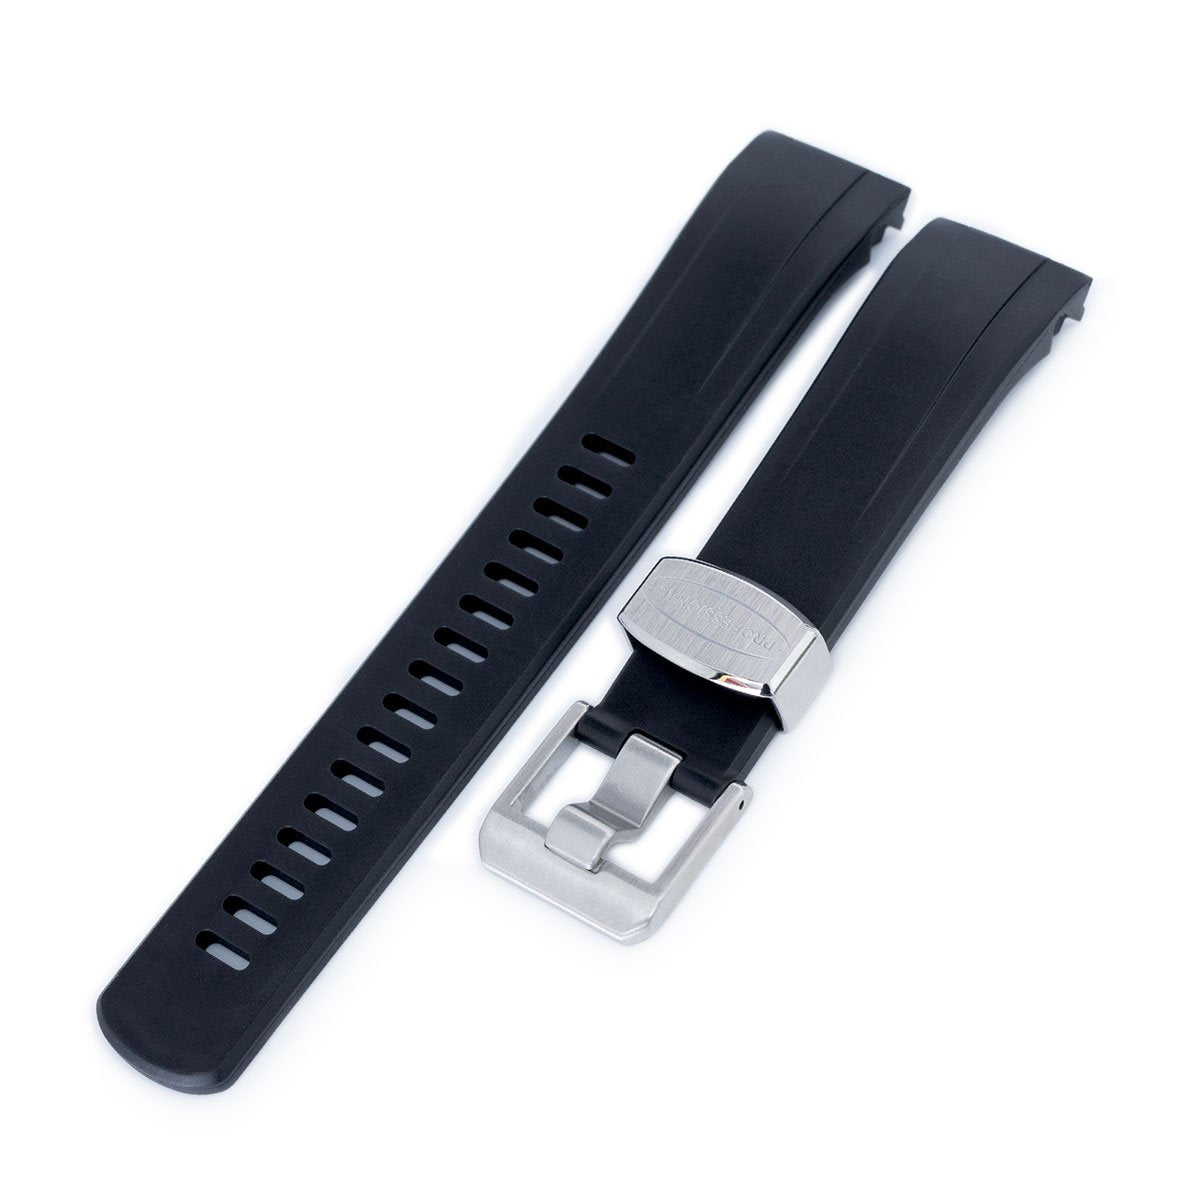 Seiko Compatible Black Military Style Nylon Strap 22mm Replacement Watch Band #6061